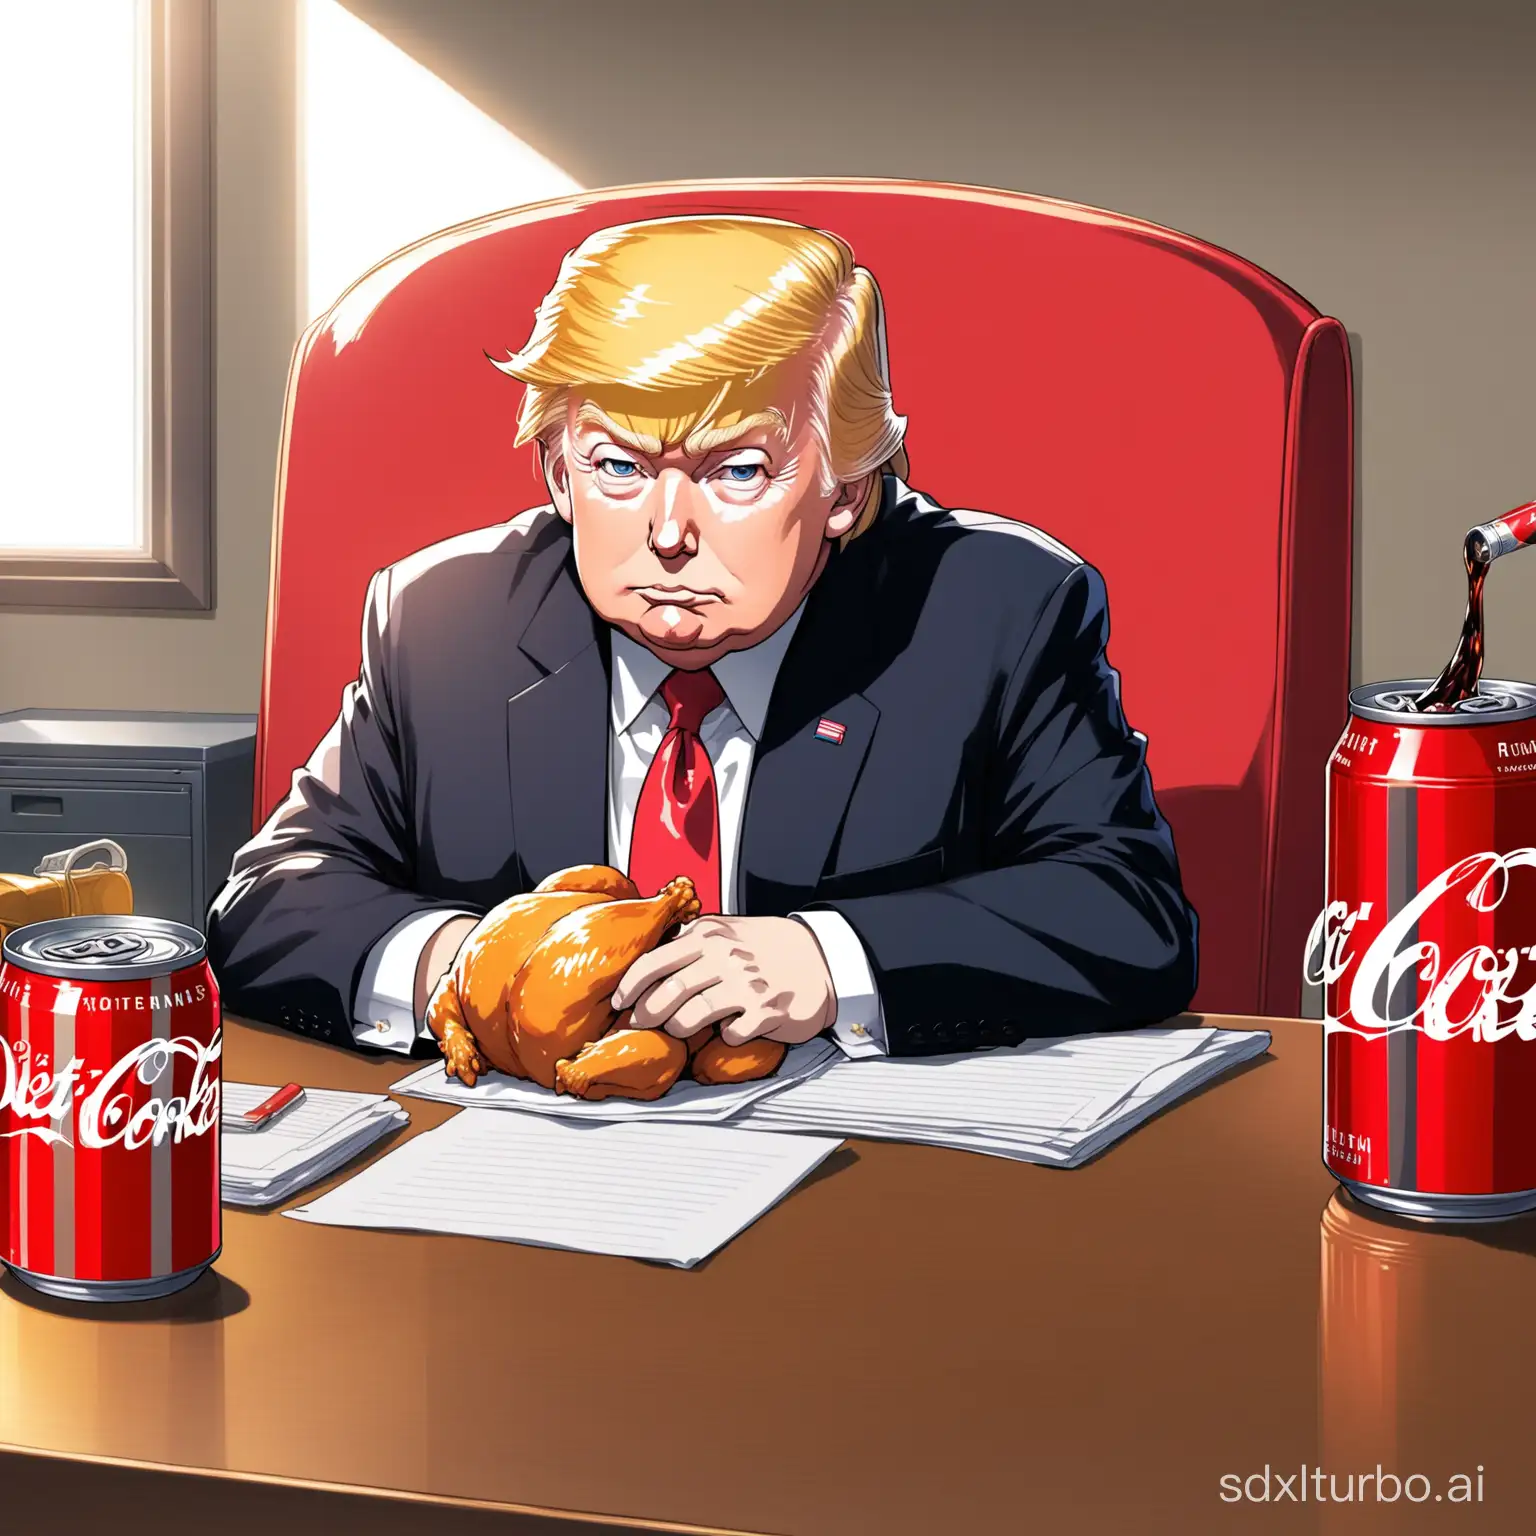 Anime-Donald-Trump-Enjoying-Fried-Chicken-and-Diet-Coke-at-Desk